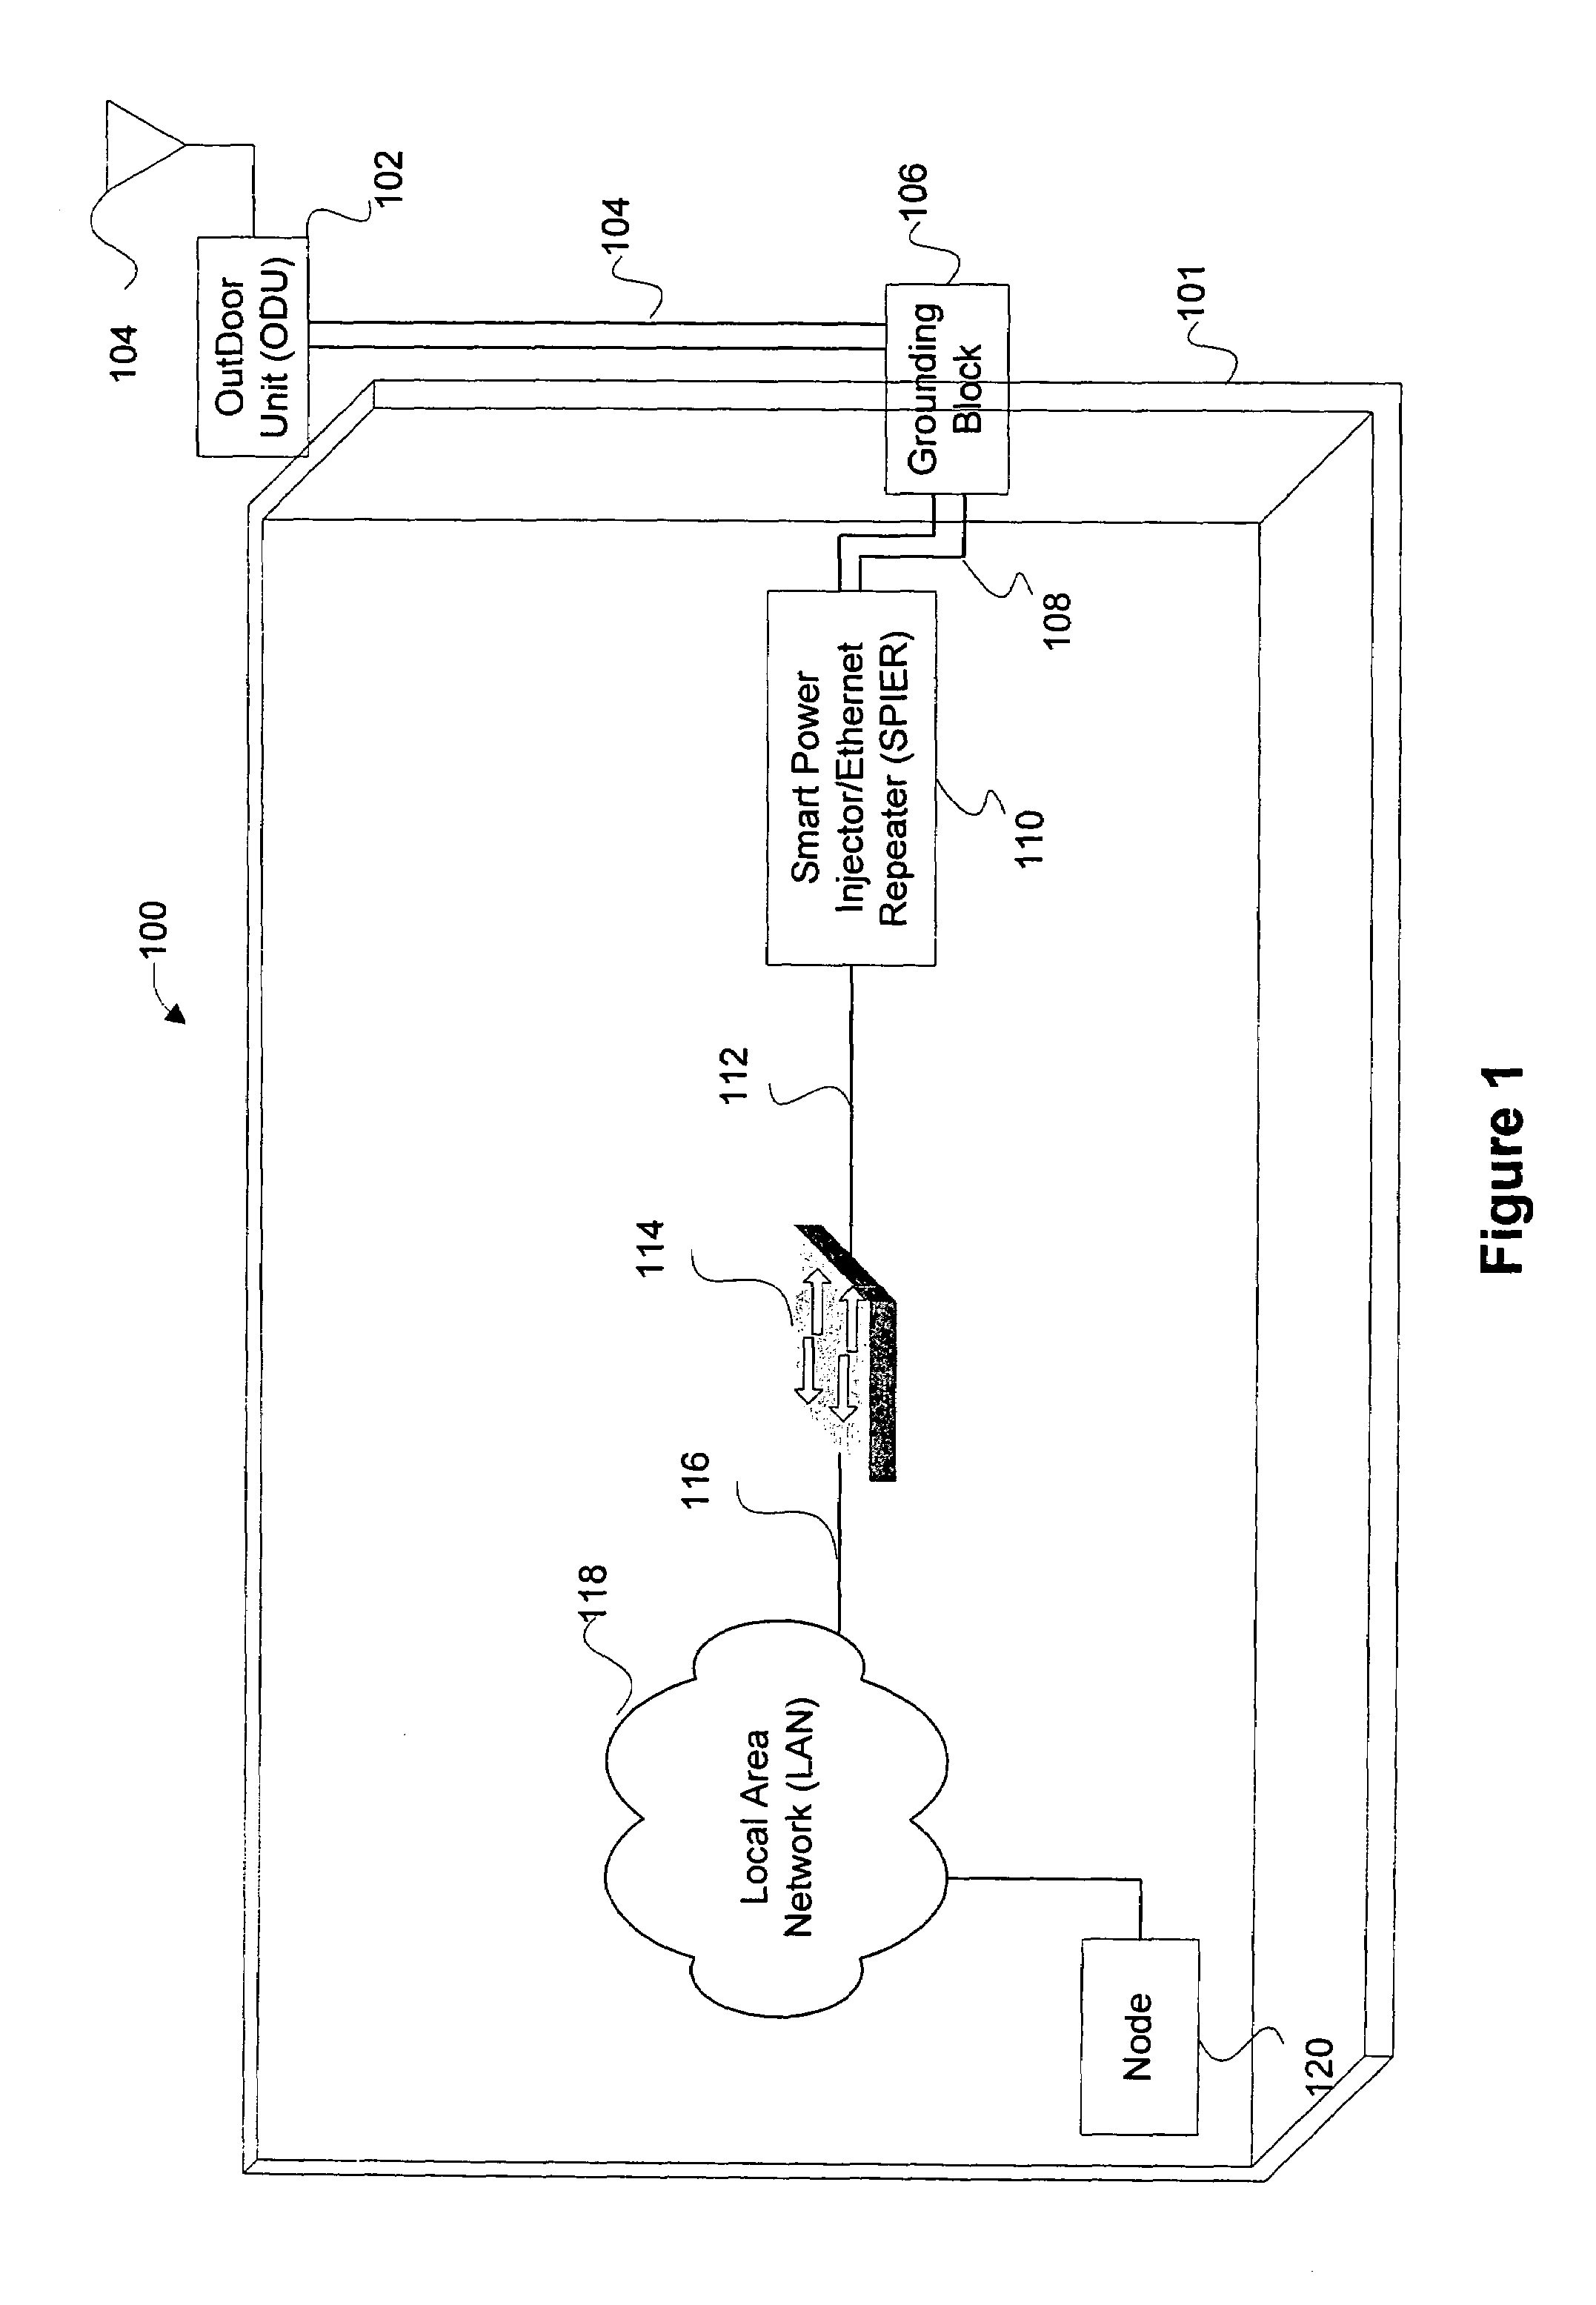 Automatic installation and alignment mode for wireless bridges